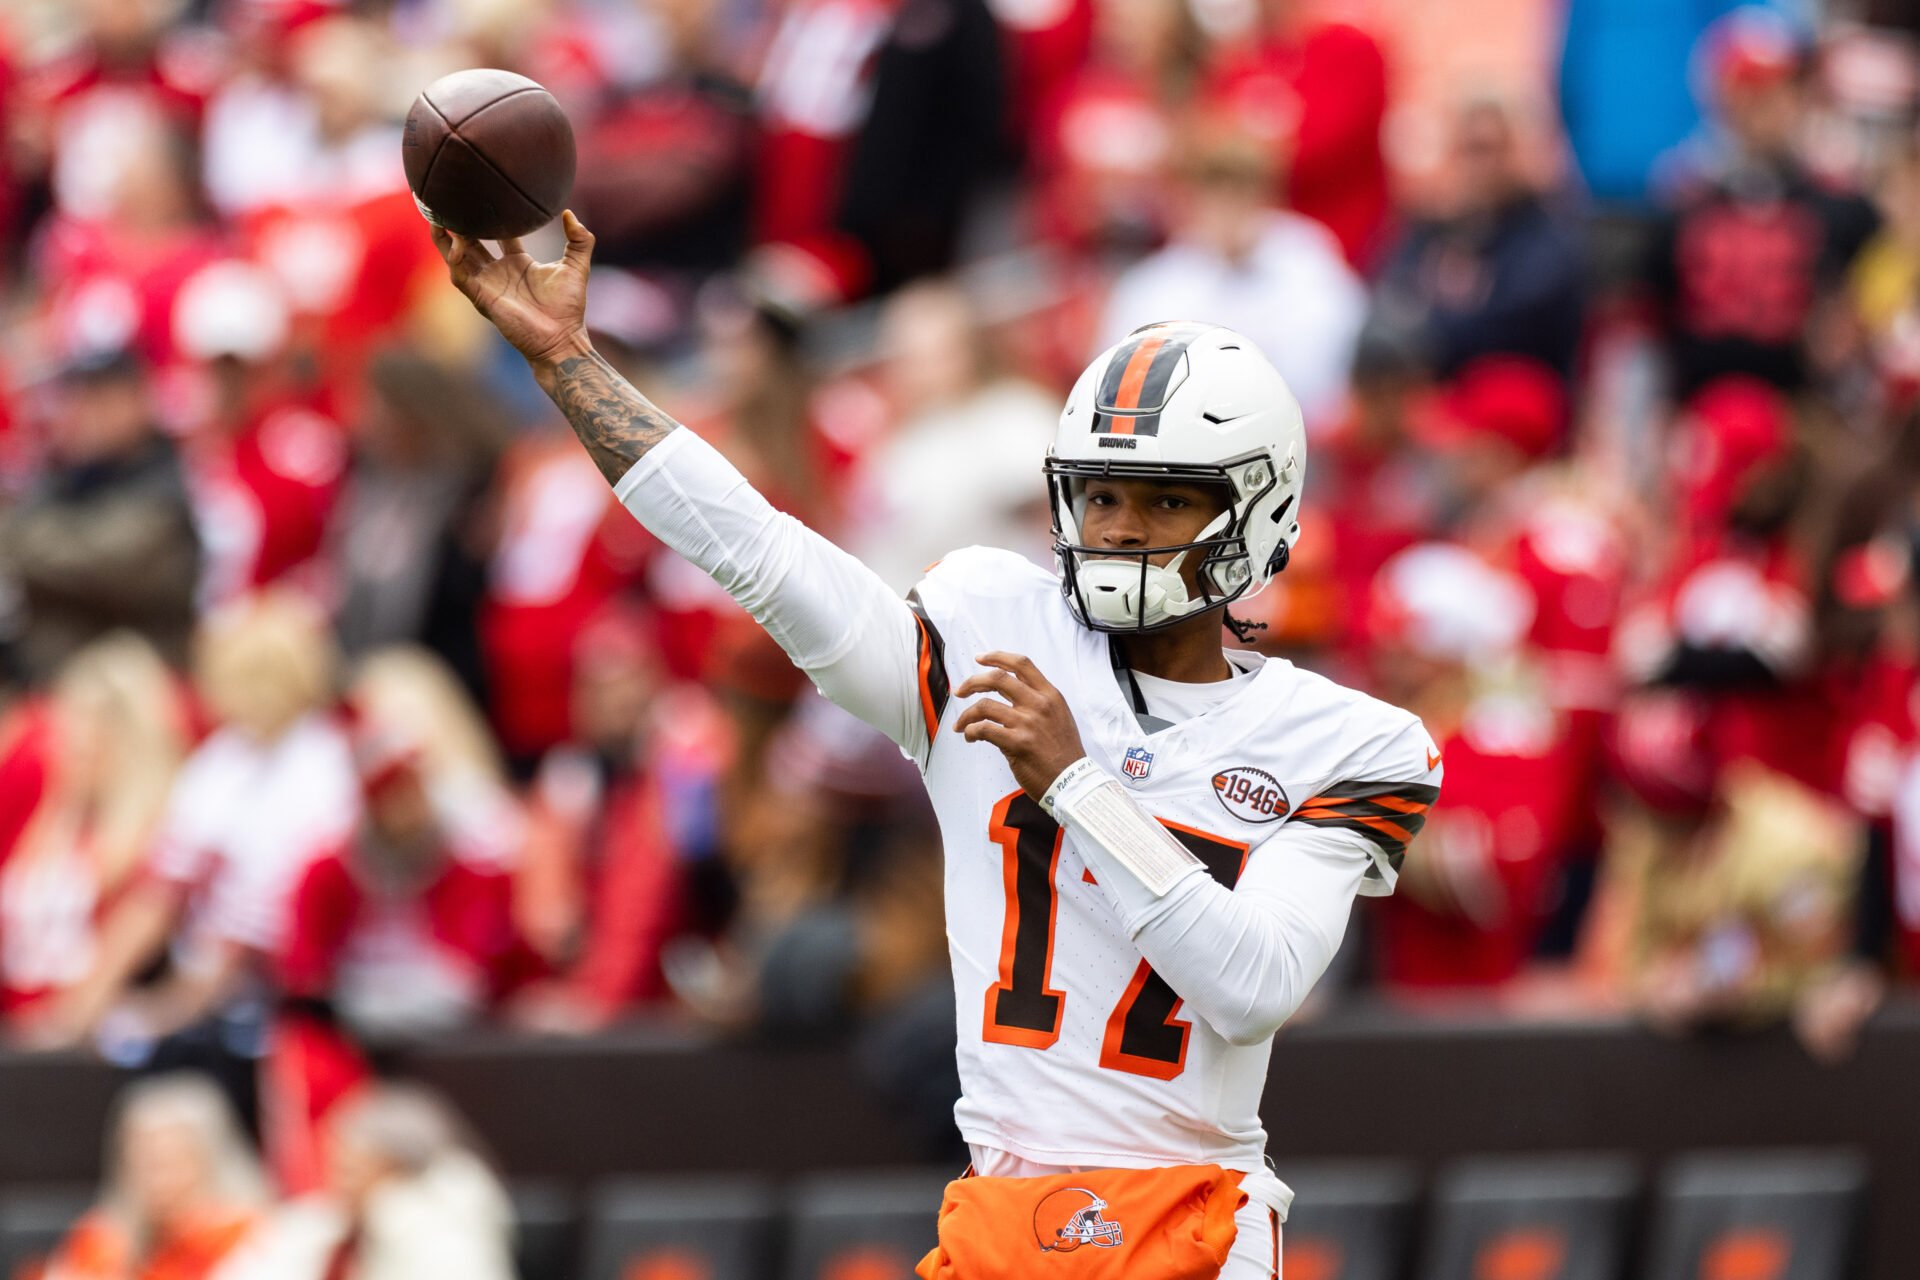 Cleveland Browns quarterback Dorian Thompson-Robinson (17) throws the ball during warm ups before the game against the San Francisco 49ers at Cleveland Browns Stadium.